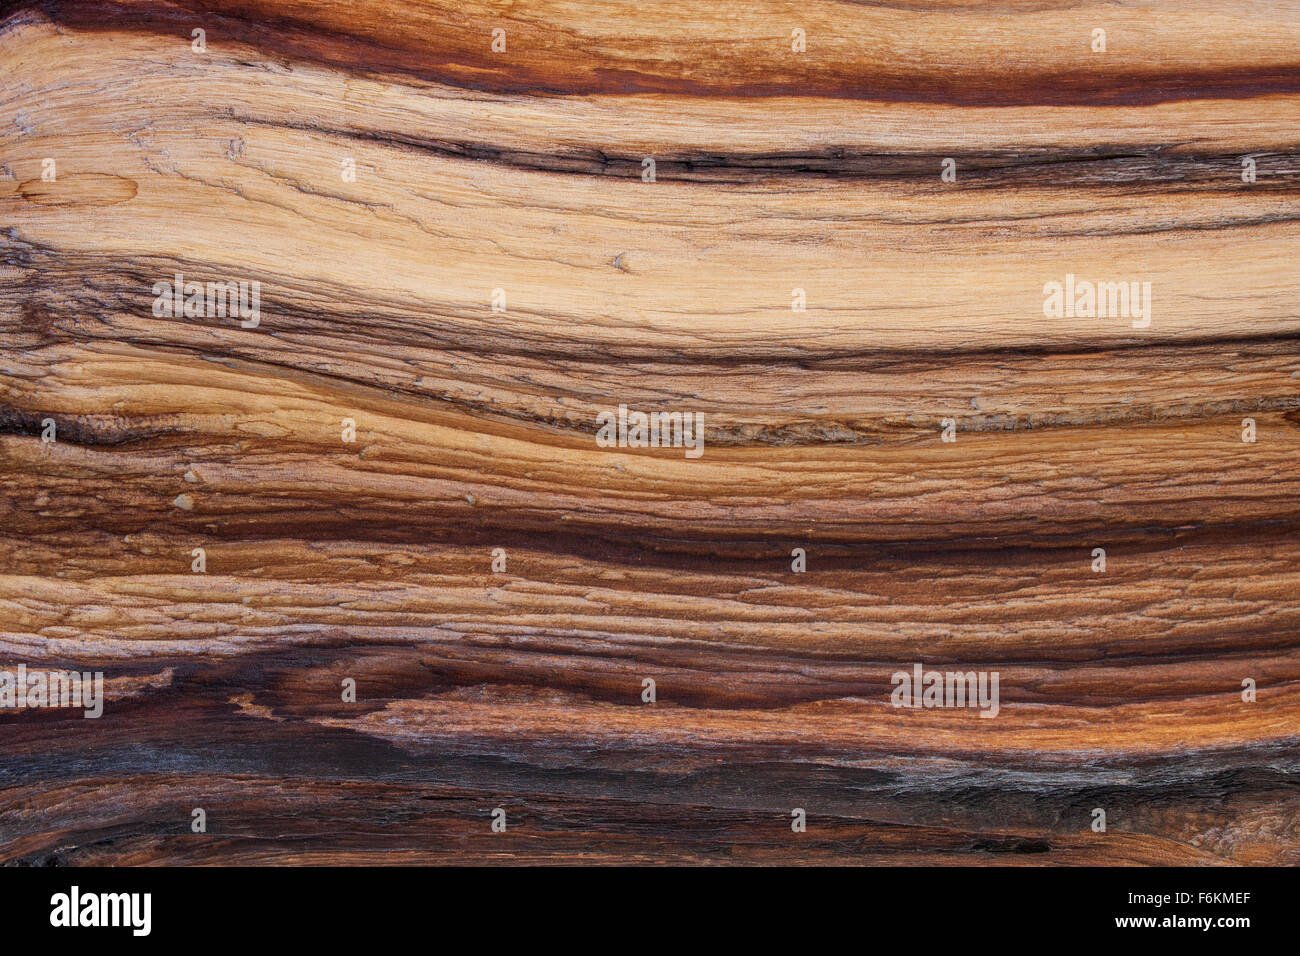 Beautiful striations in an exposed section of an ancient bristlecone tree trunk. Ancient Bristlecone Pine Forest, California, US Stock Photo